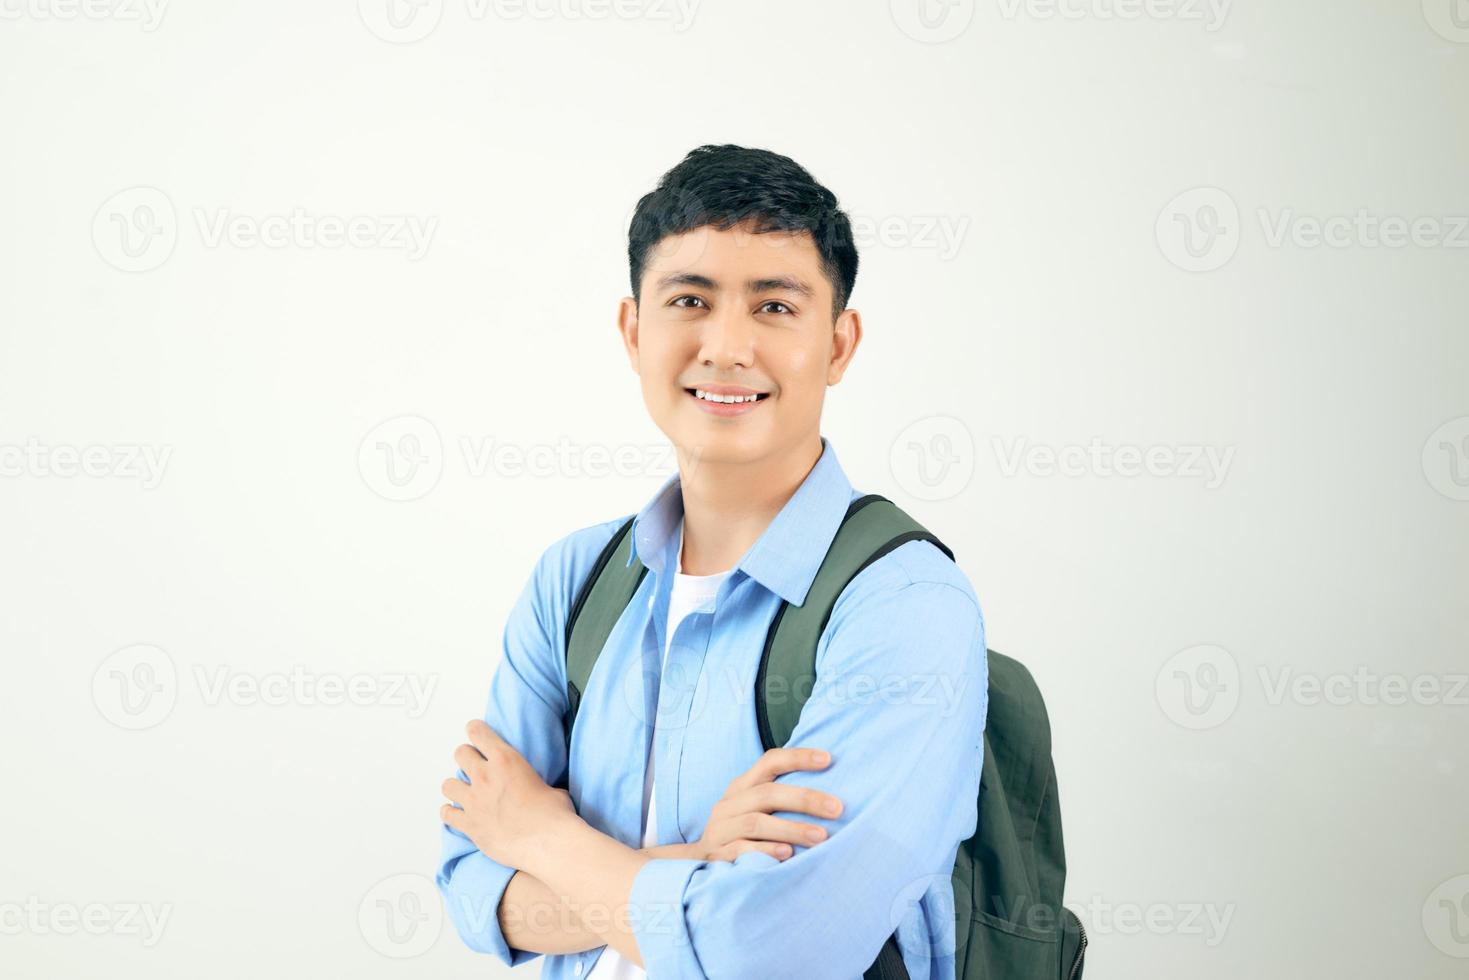 Handsome and friendly face man self-confident positive expression with crossed arms on white background photo